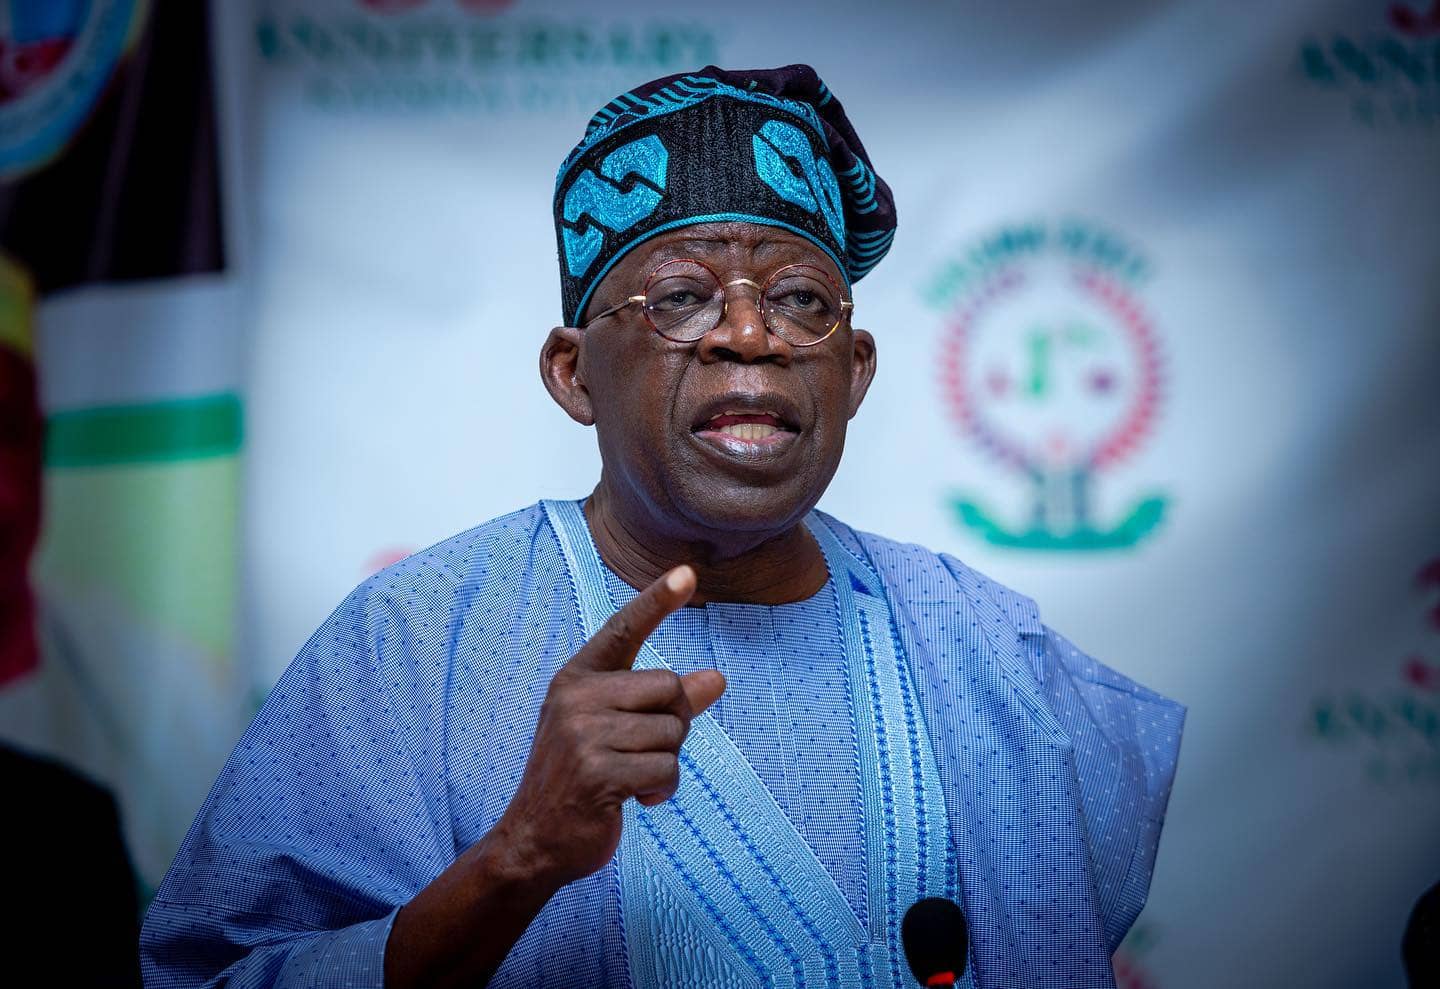 It’s not in my character to abu§e past governments — President Tinubu